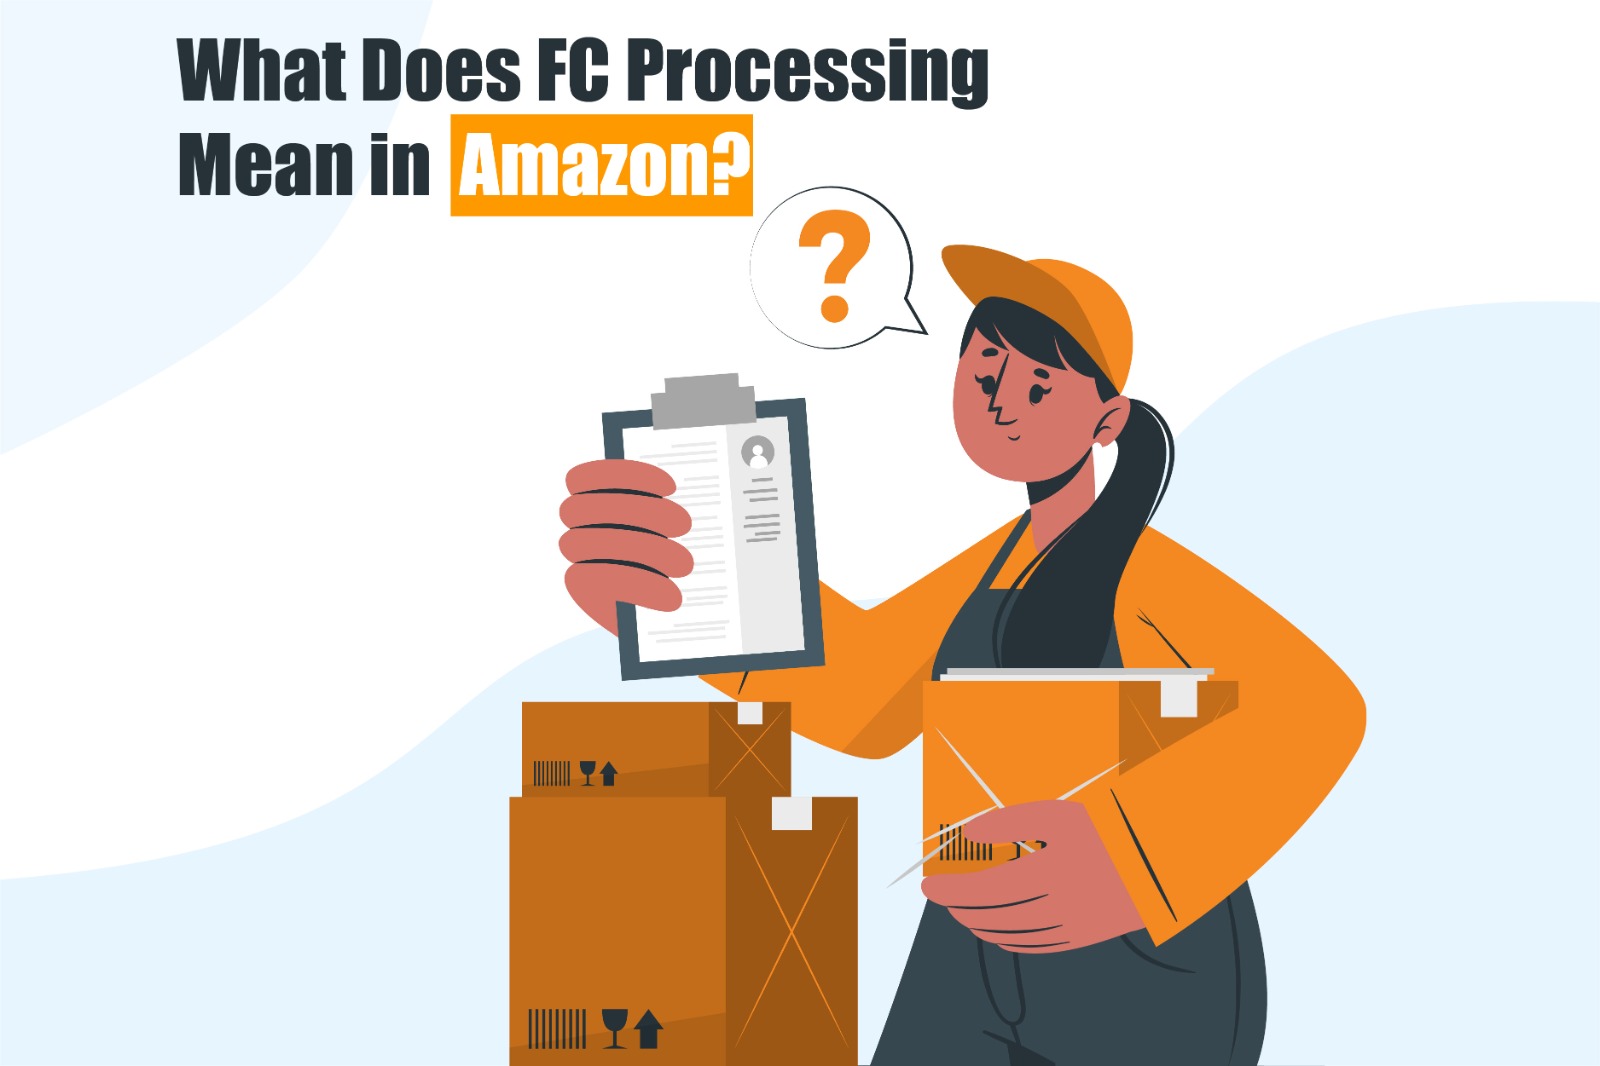 What Does FC Processing Mean in Amazon